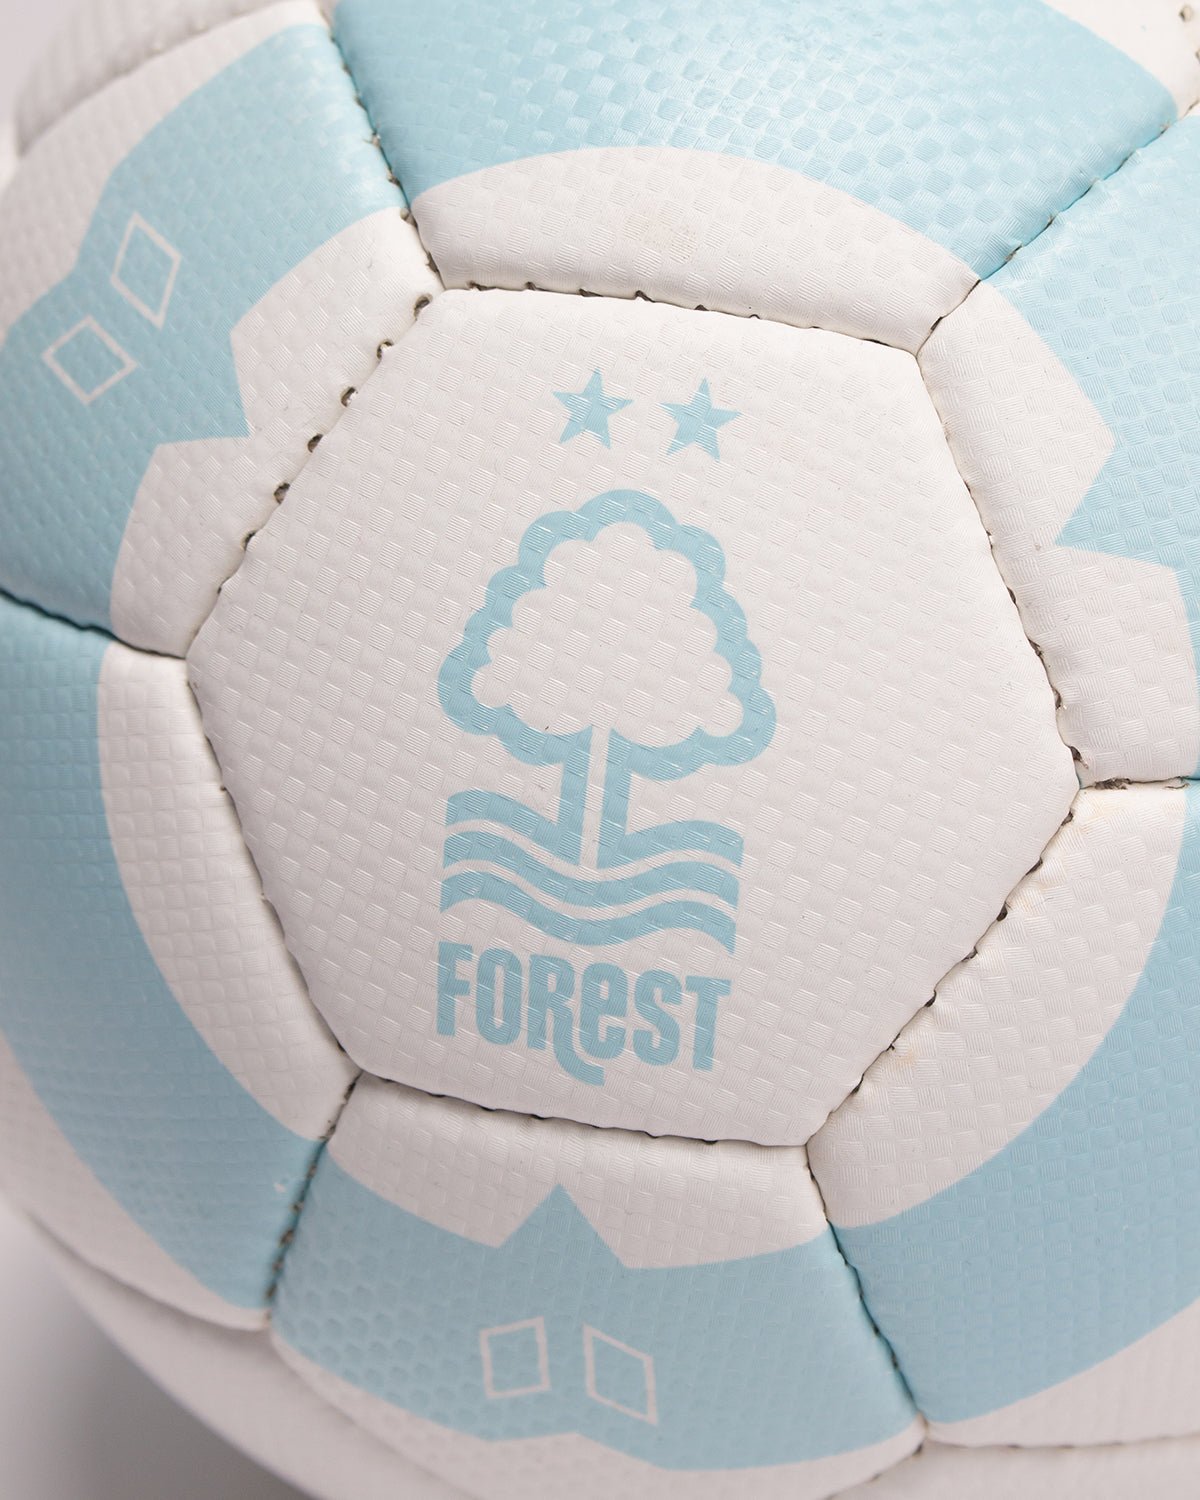 NFFC White Hoop Football - Size 5 - Nottingham Forest FC